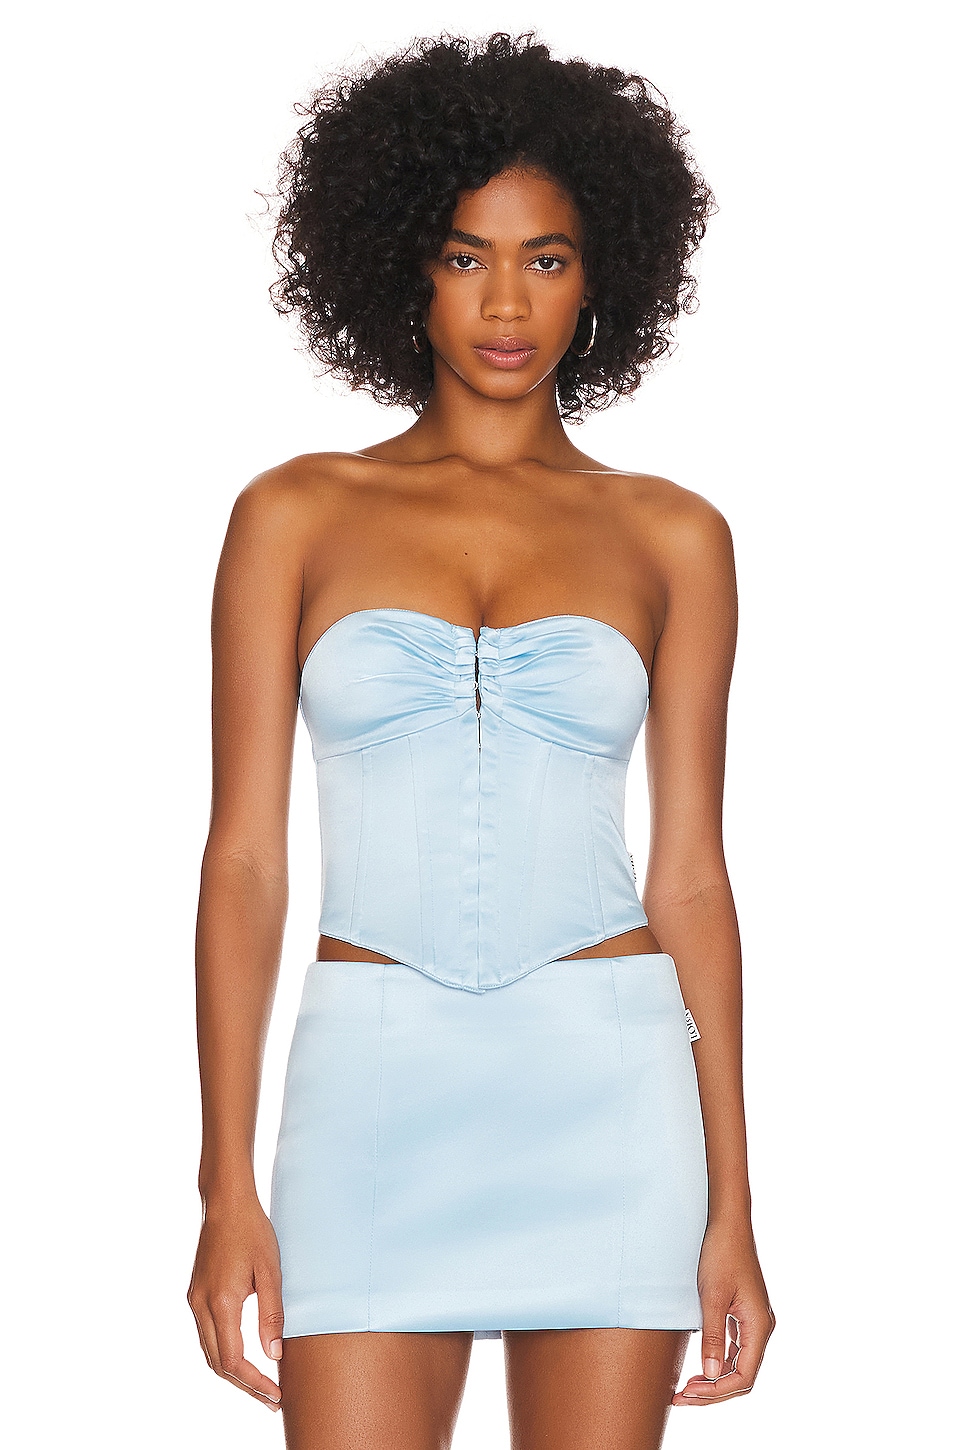 Margery Embellished Bustier Top